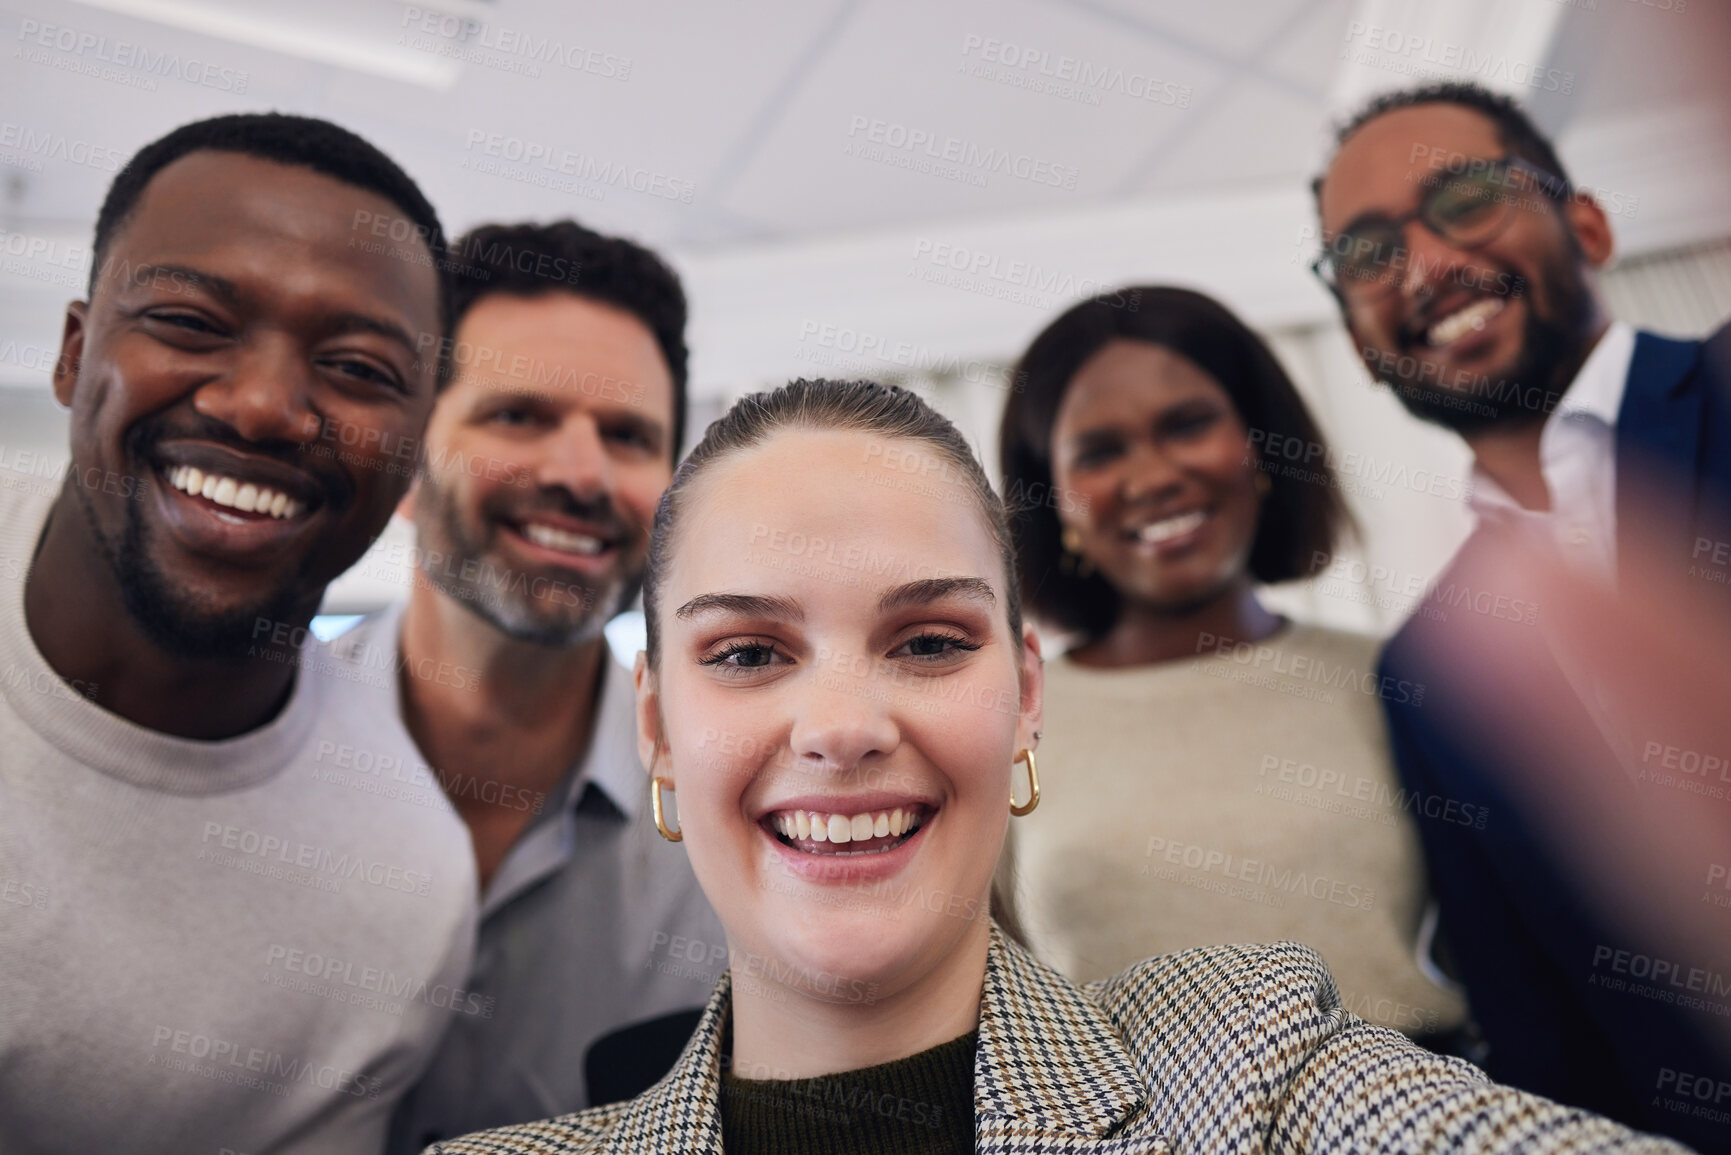 Buy stock photo Group, business people and selfie in office portrait with smile, happiness and social media app with diversity. Men, woman and photography in workplace for teamwork, profile picture and solidarity